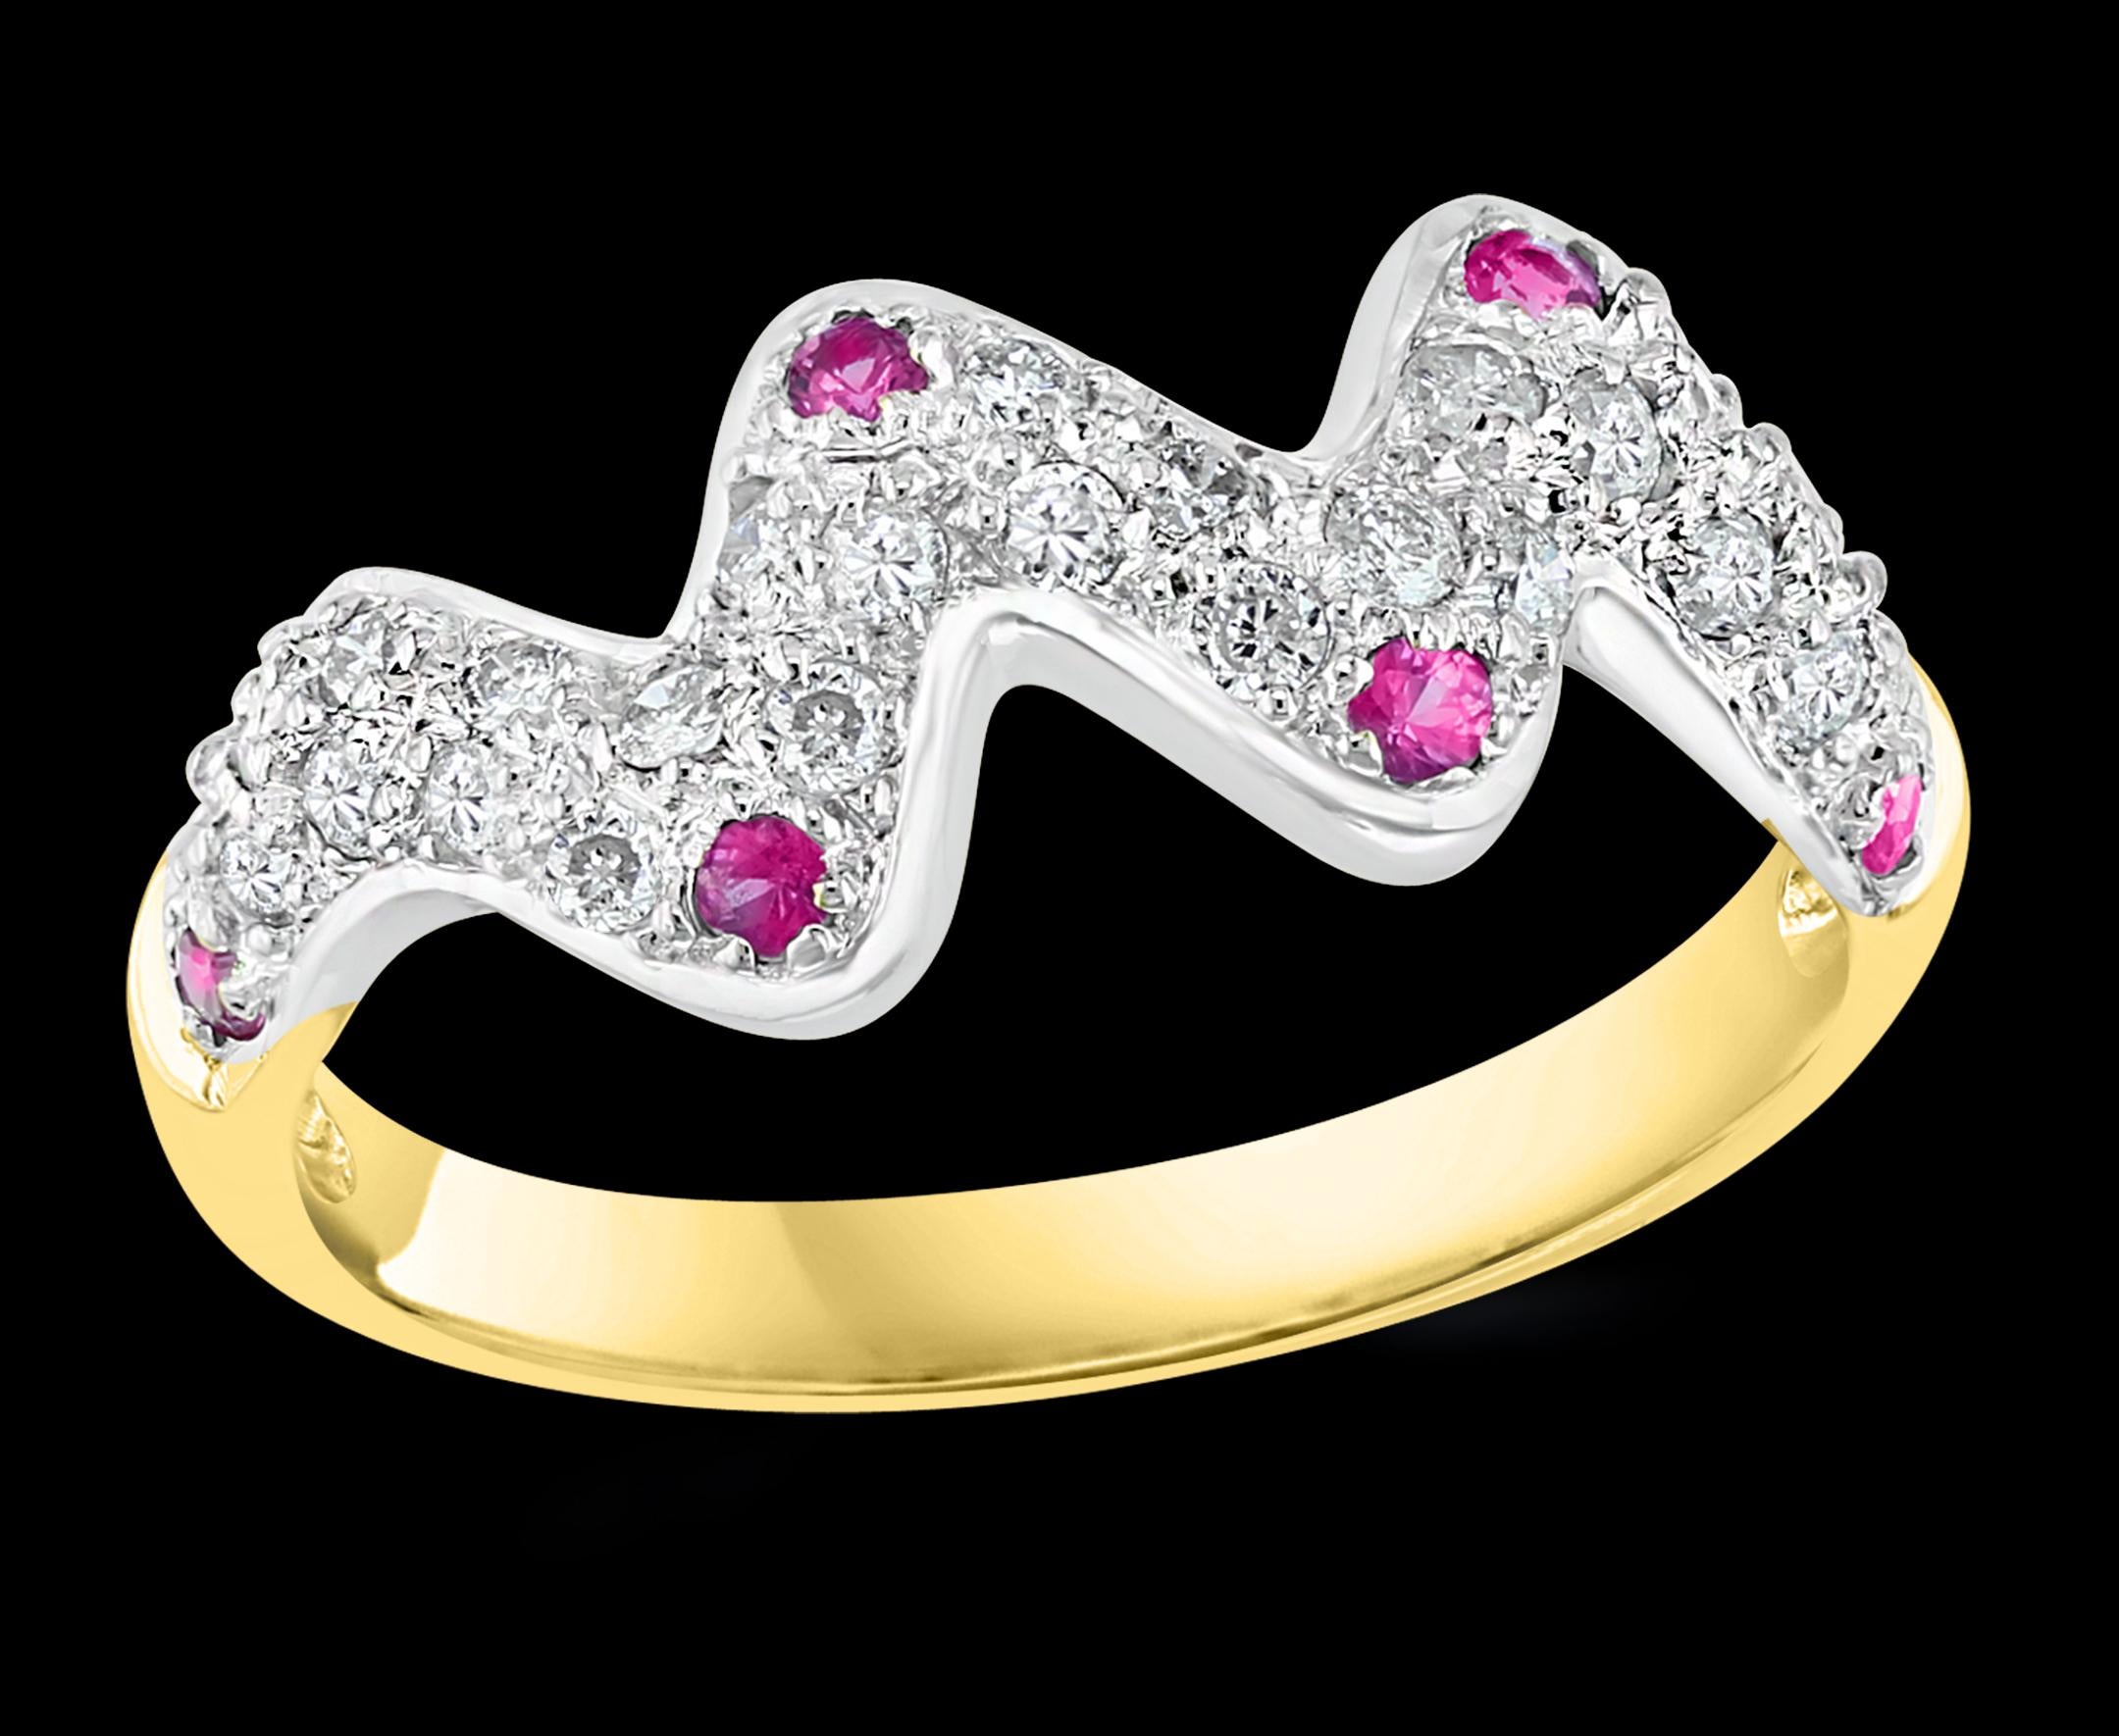 A classic, Band , Very delicate ring !
 Pink Sapphire &  Diamond 14 Karat White Gold Band Ring, Estate Size 6.5
6  natural Pink sapphire and Approximately 0.35 Ct  Diamond 14 Karat  White gold   Ring
Good for Teen age girls and young adults.
 All